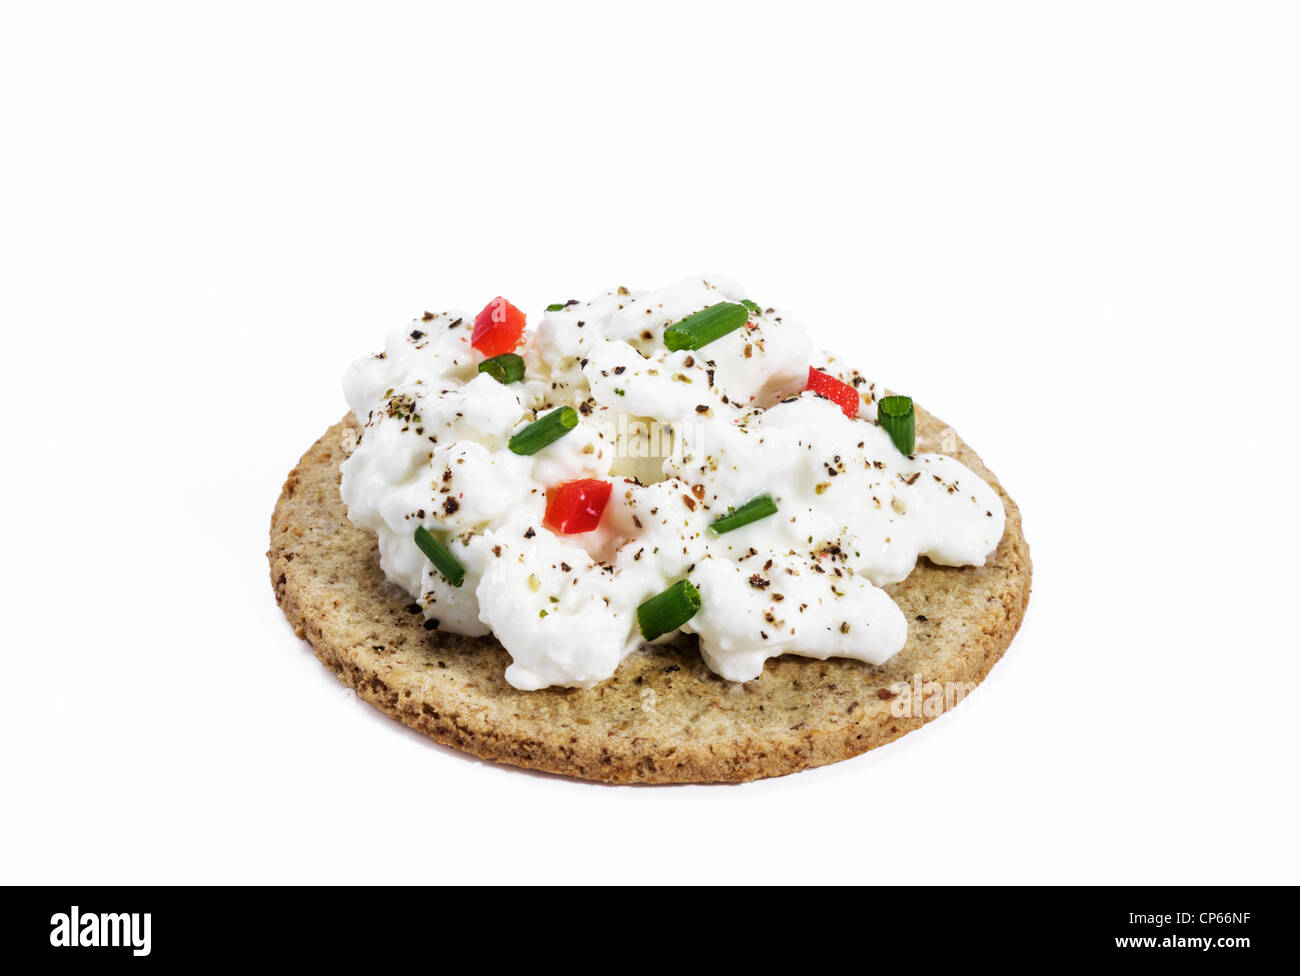 Oatcake topped with cottage cheese garnished with chives,red capsicum and ground pepper Stock Photo